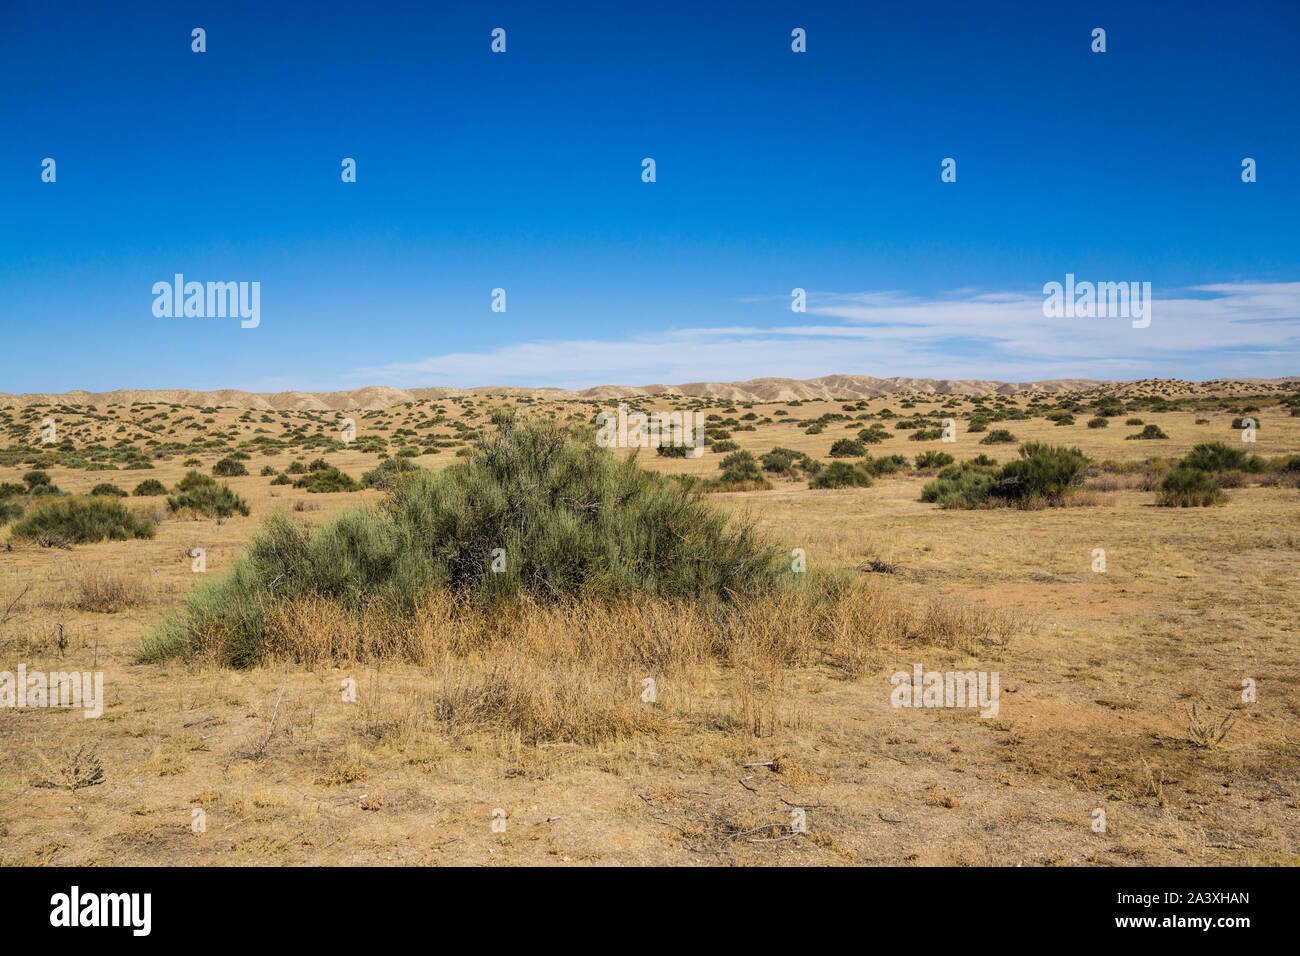 Green creosote bush grows in the dry arid desert of southern California. Stock Photo